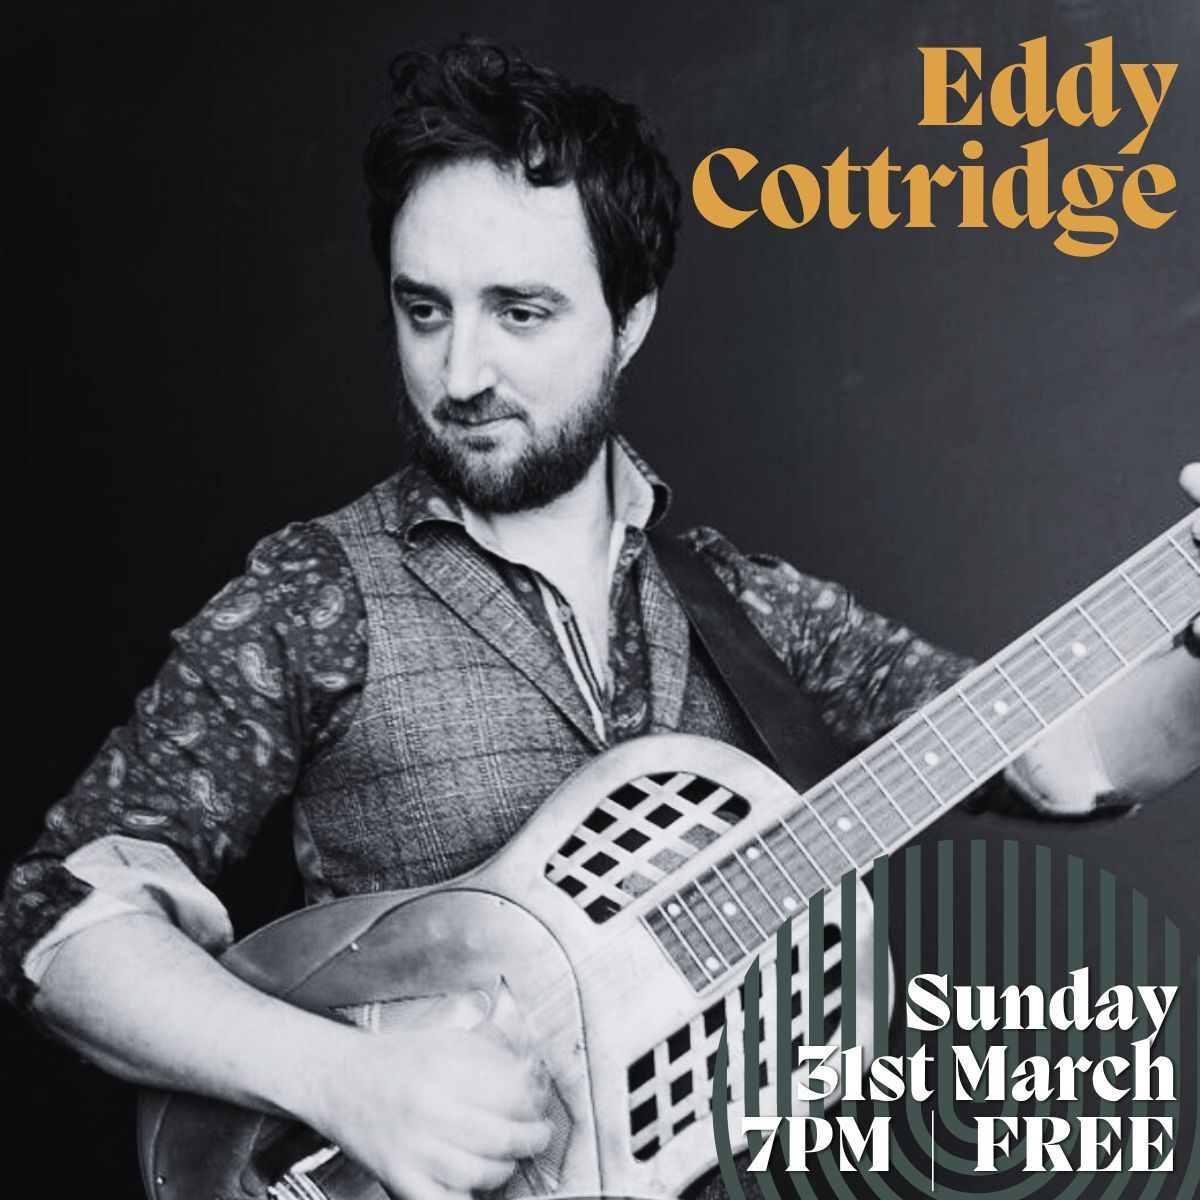 This Sunday we have the wonderful Eddy Cottridge with us at the Alma. Singer and guitarist Cottridge will be playing a range of old-time Americana, with country blues and trad jazz influences. Not to be missed!